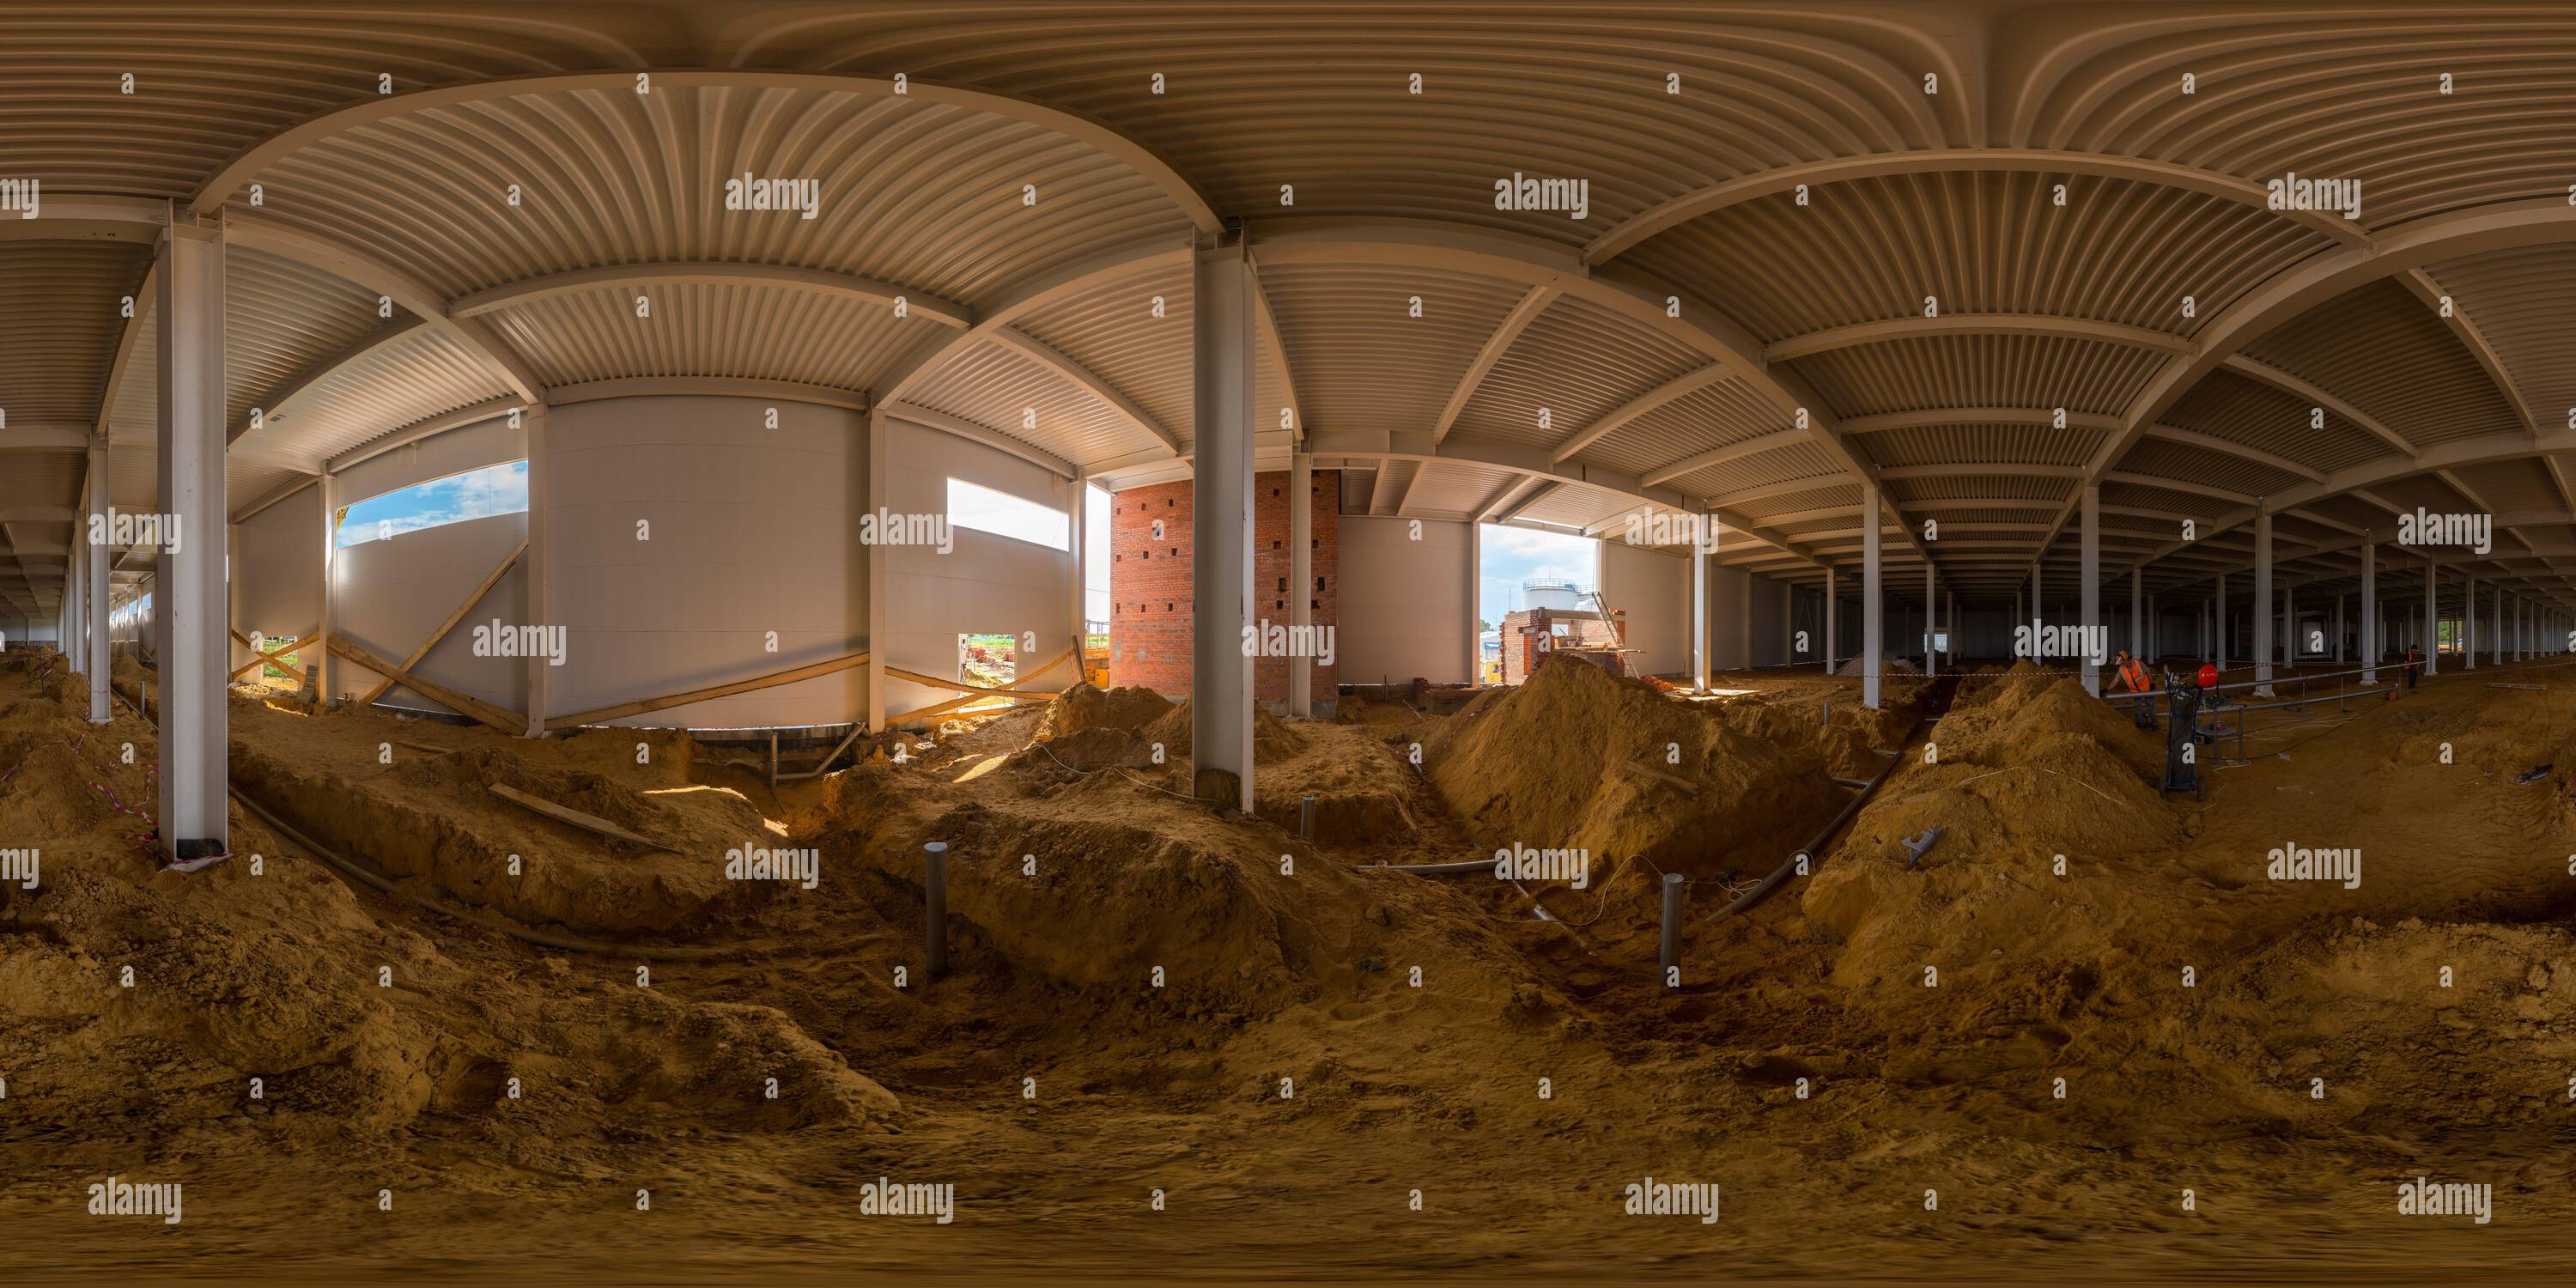 360 degree panoramic view of Seamless full spherical 360 degree panorama in equirectangular projection of indoor construction site in Tula, Russia - June 4, 2013